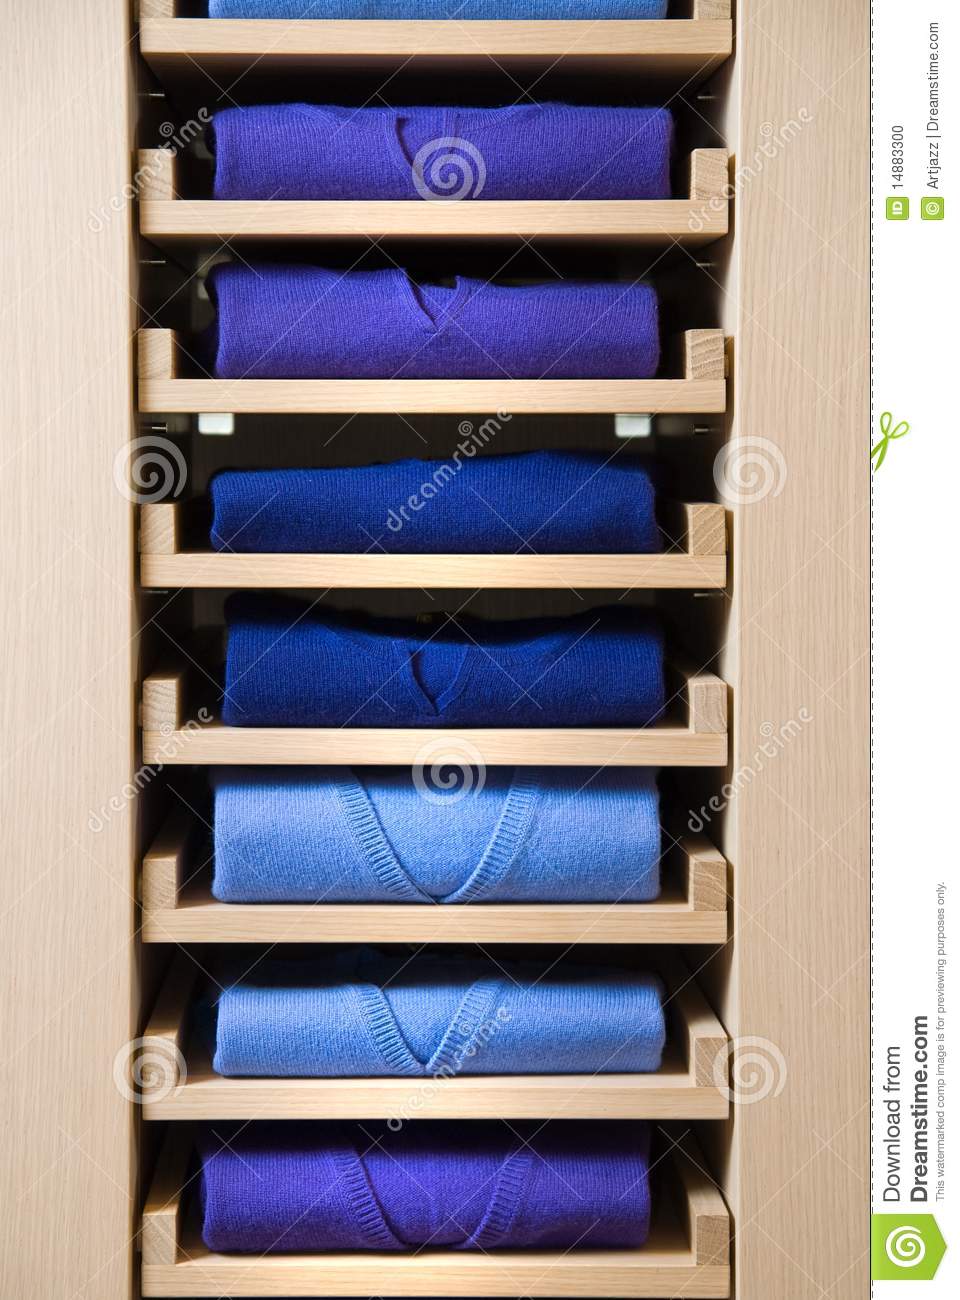 Store Shelf With Color Clothes Stock Photo   Image  14883300